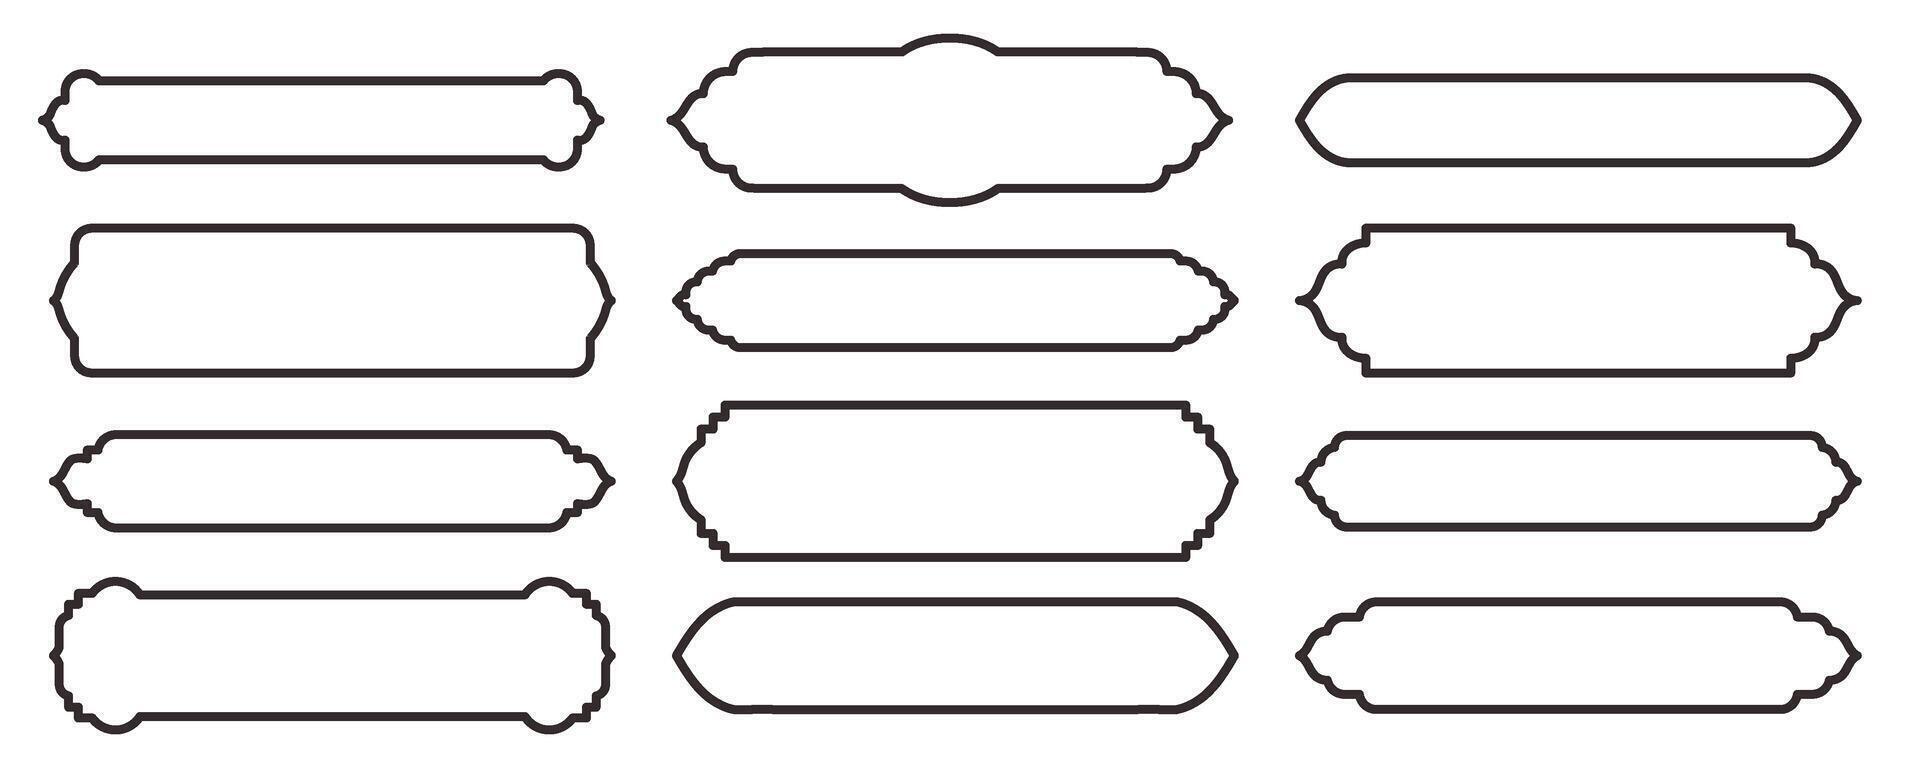 Collection of traditional Islamic horizontal window or door shapes for border or separator design. Set of Mosque Muslim frames in outline. vector